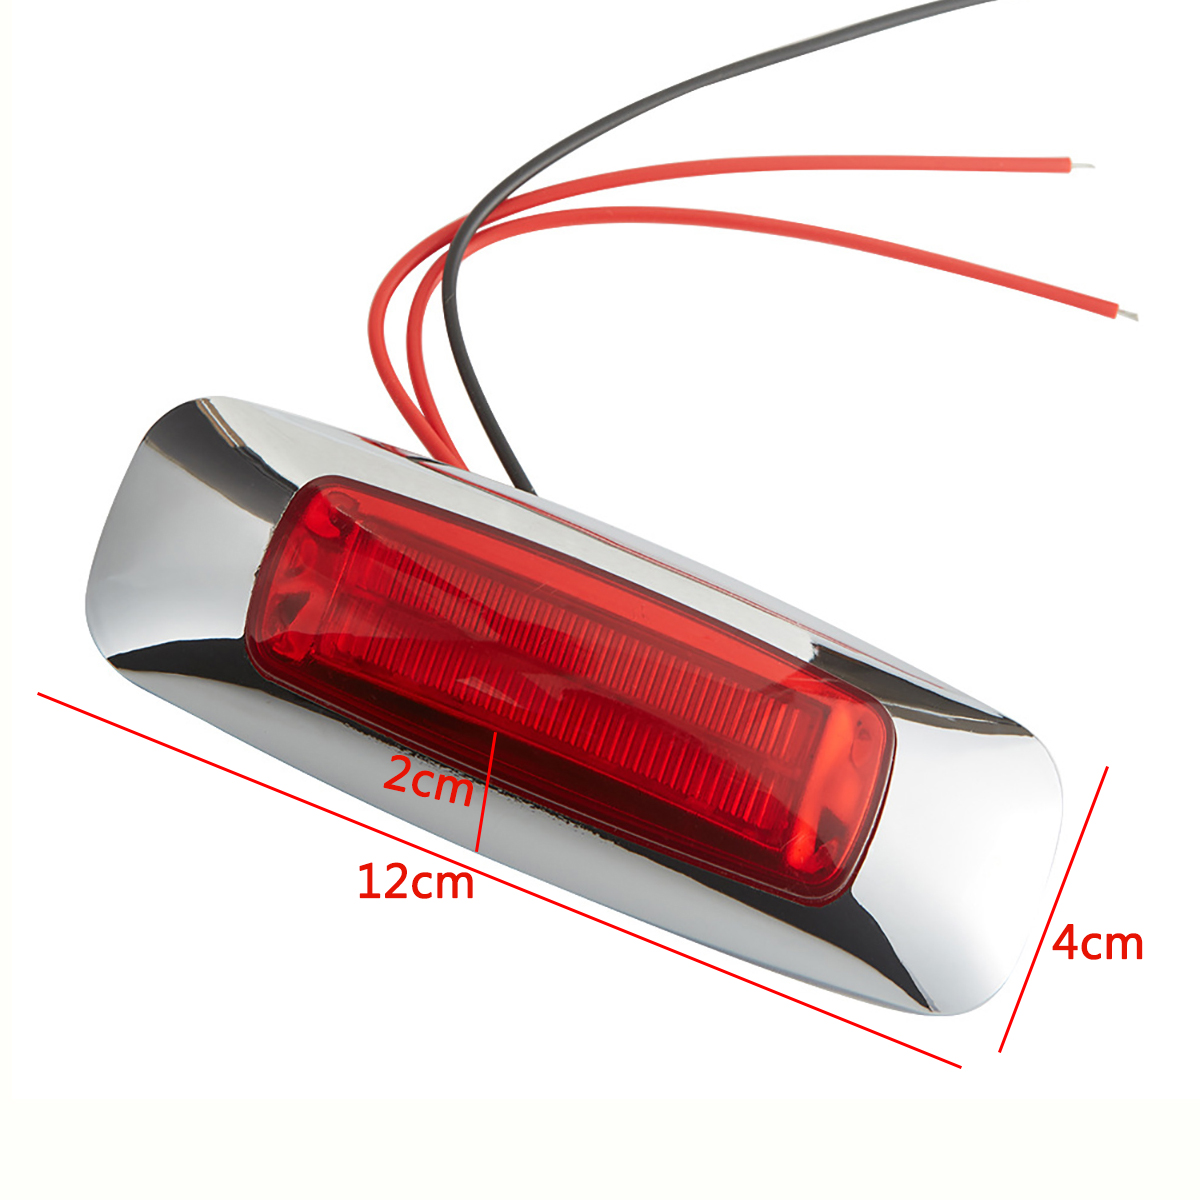 Find 2X 8LED 12V/24V Waterproof Side Marker Lights Taillights For Truck Pickup for Sale on Gipsybee.com with cryptocurrencies